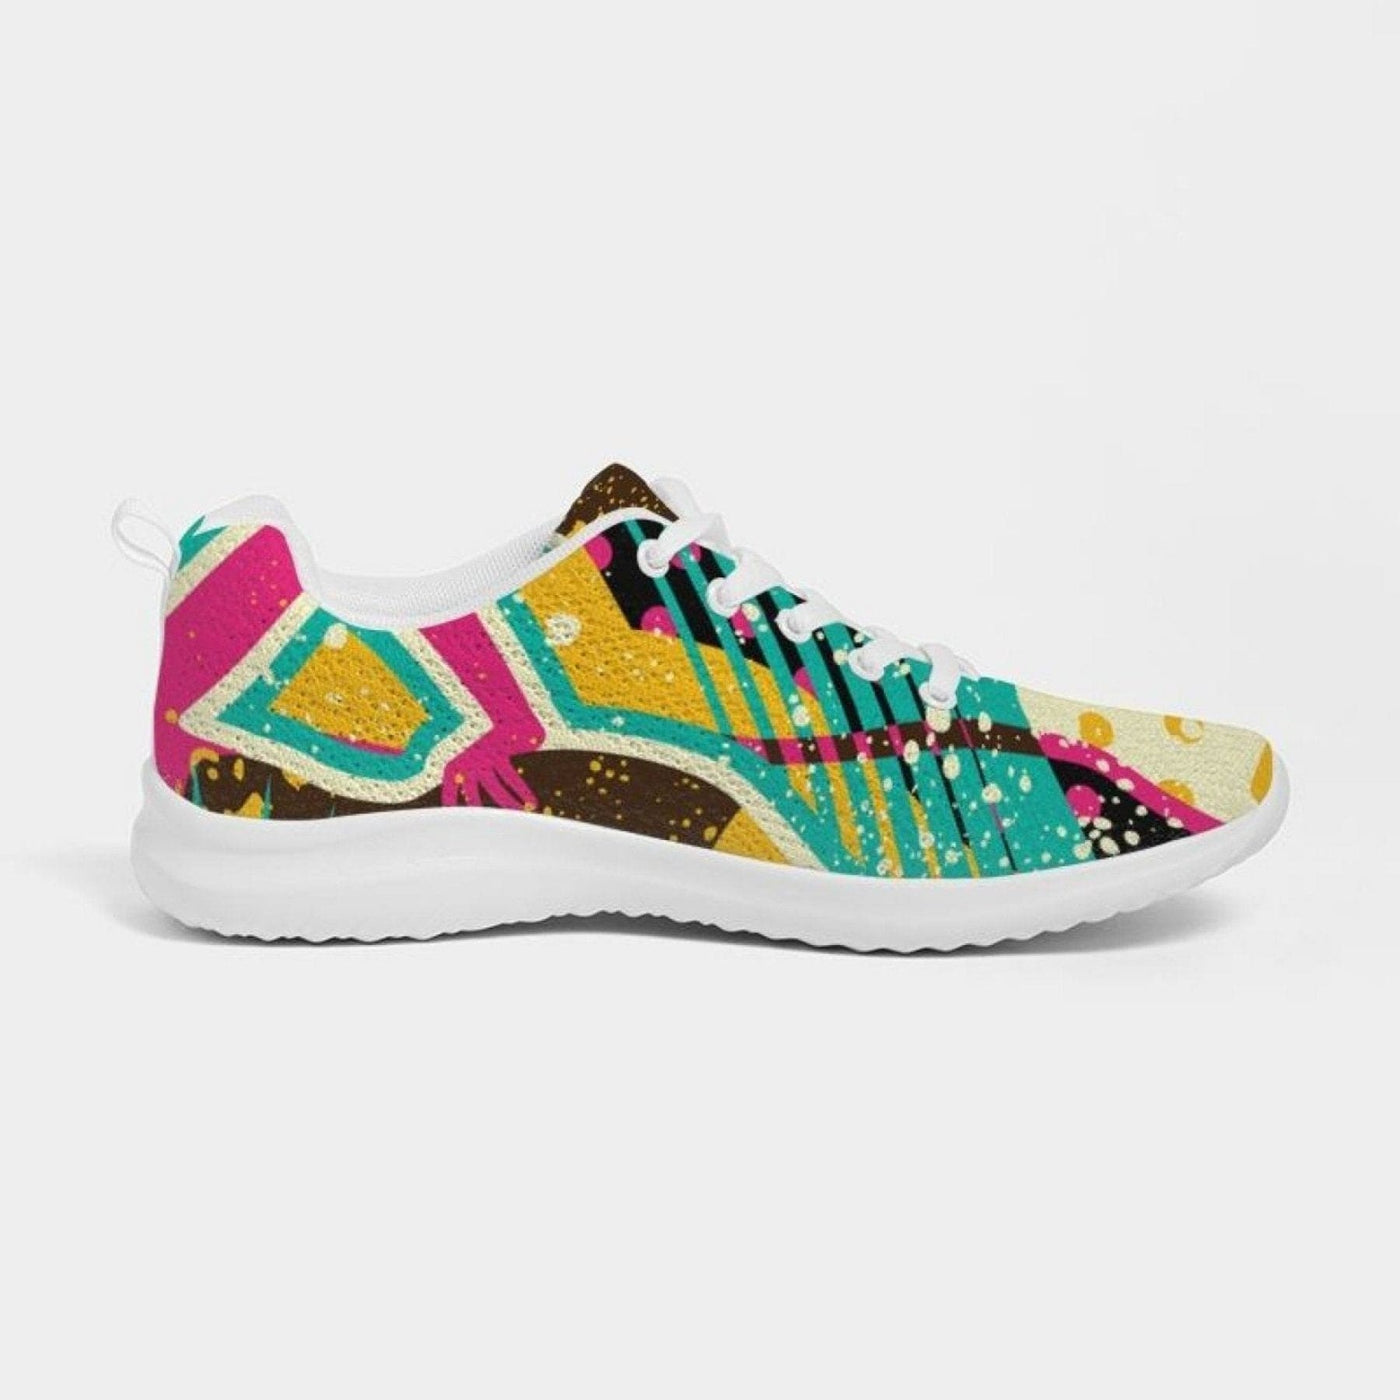 Womens Sneakers - Canvas Running Shoes Multicolor Pop Print - Womens | Sneakers